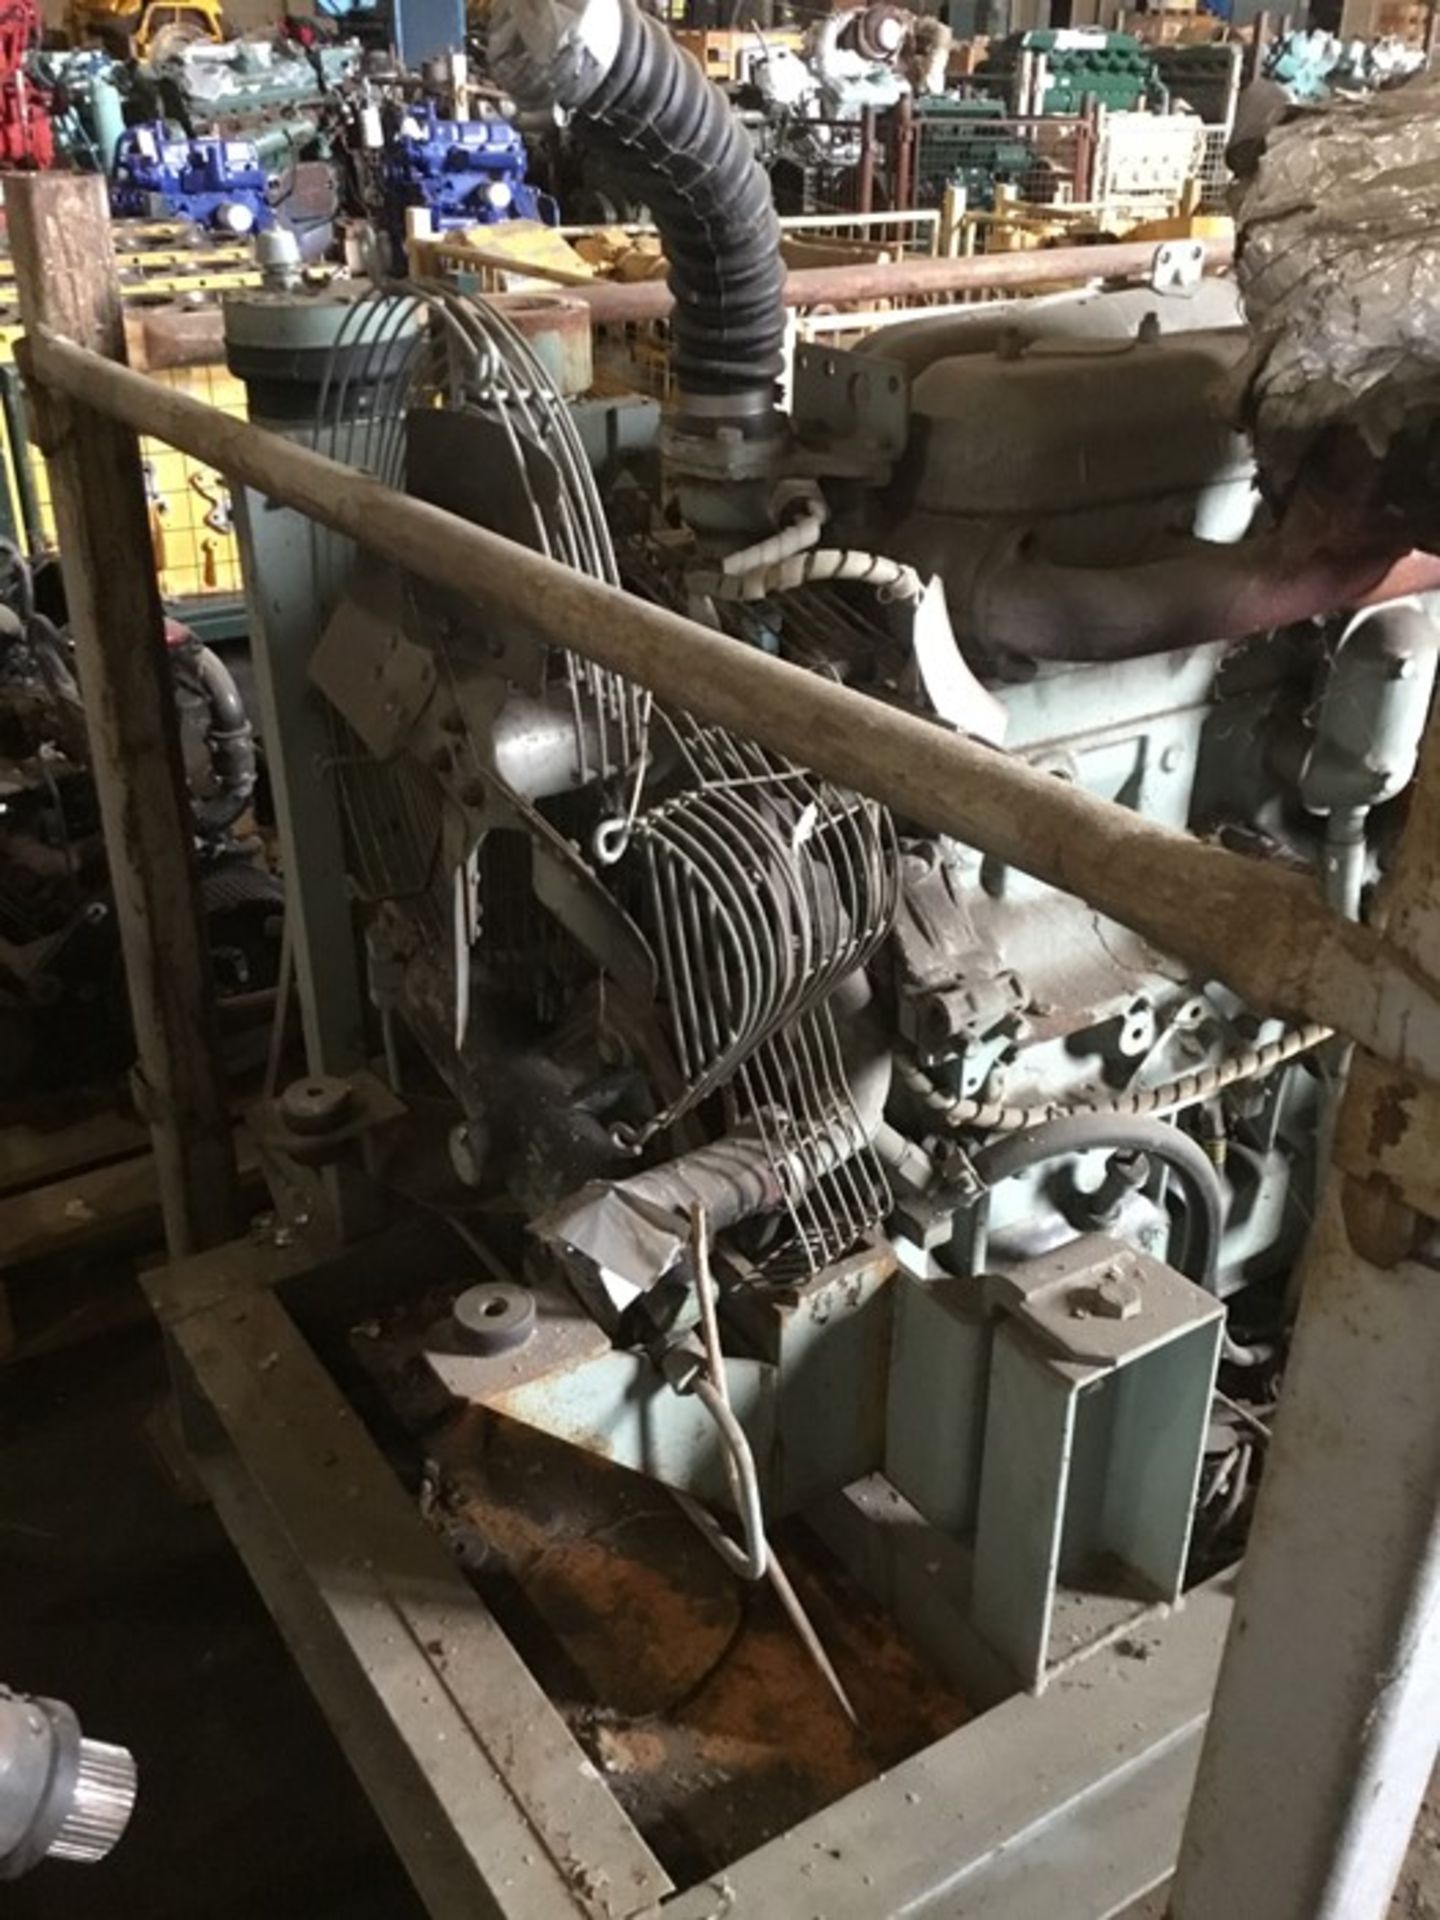 Iveco 8041 Diesel engine: Iveco 8041.04 4cyl non Turbo, Serial 8041.0*306-747516 Incomplete - Image 13 of 15